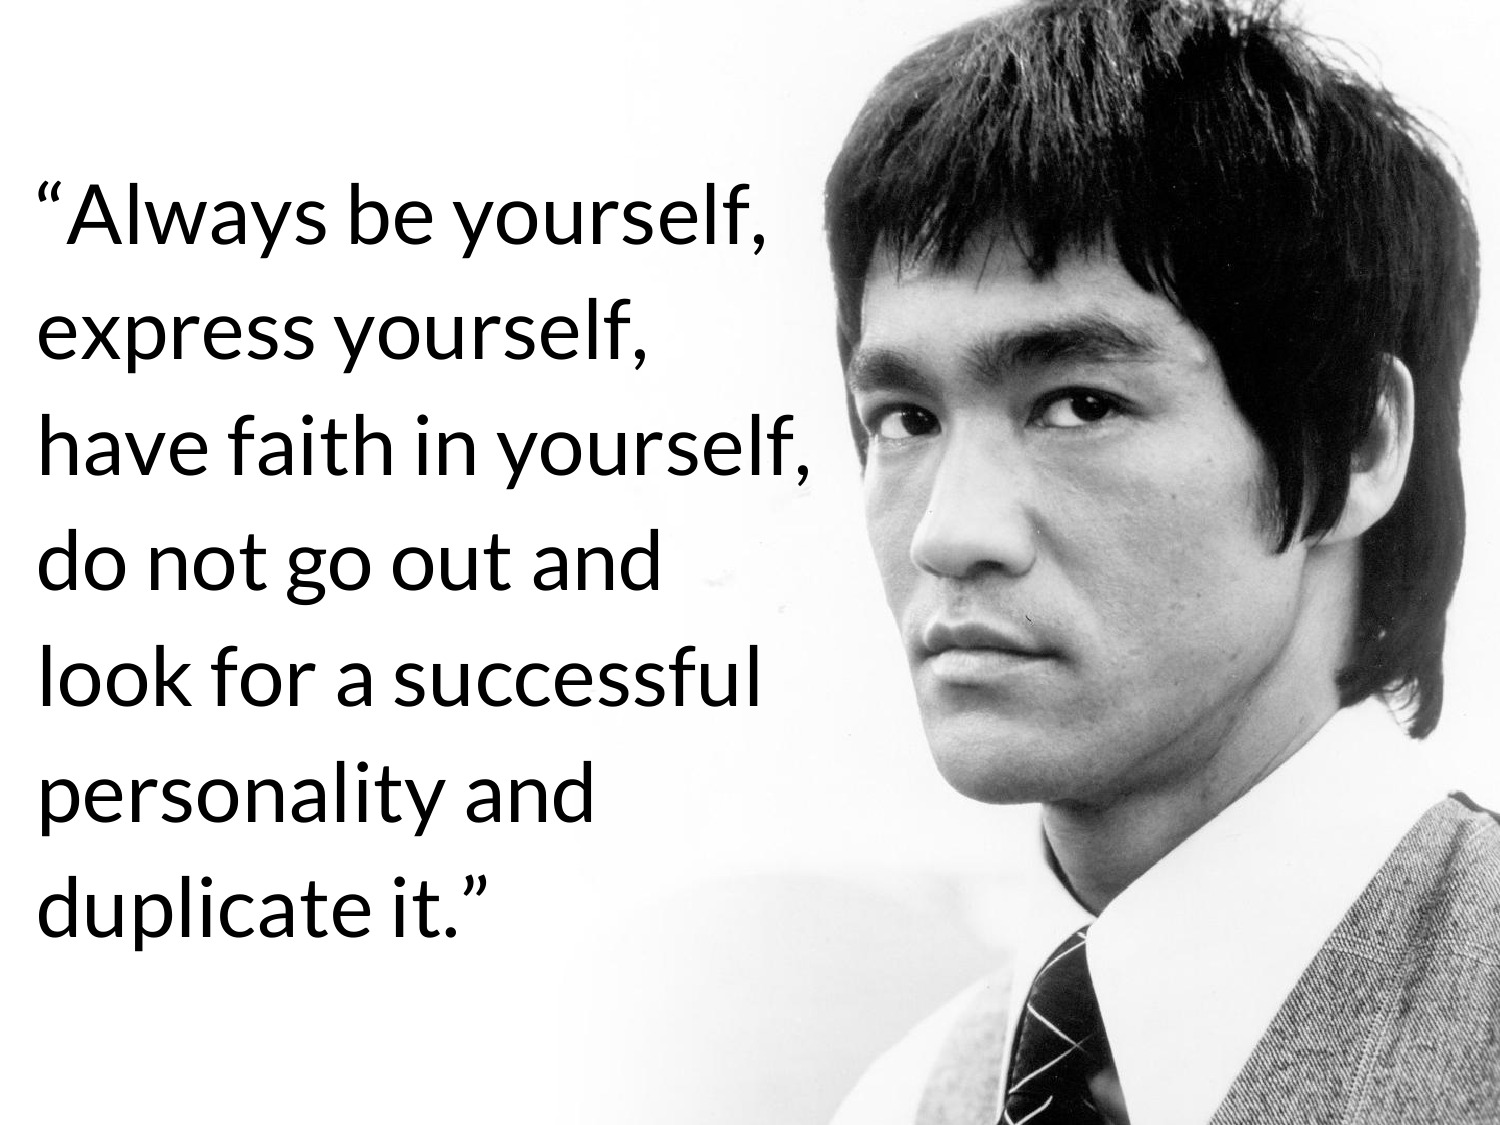 Bruce Lee Courage Quote - HD Wallpaper 